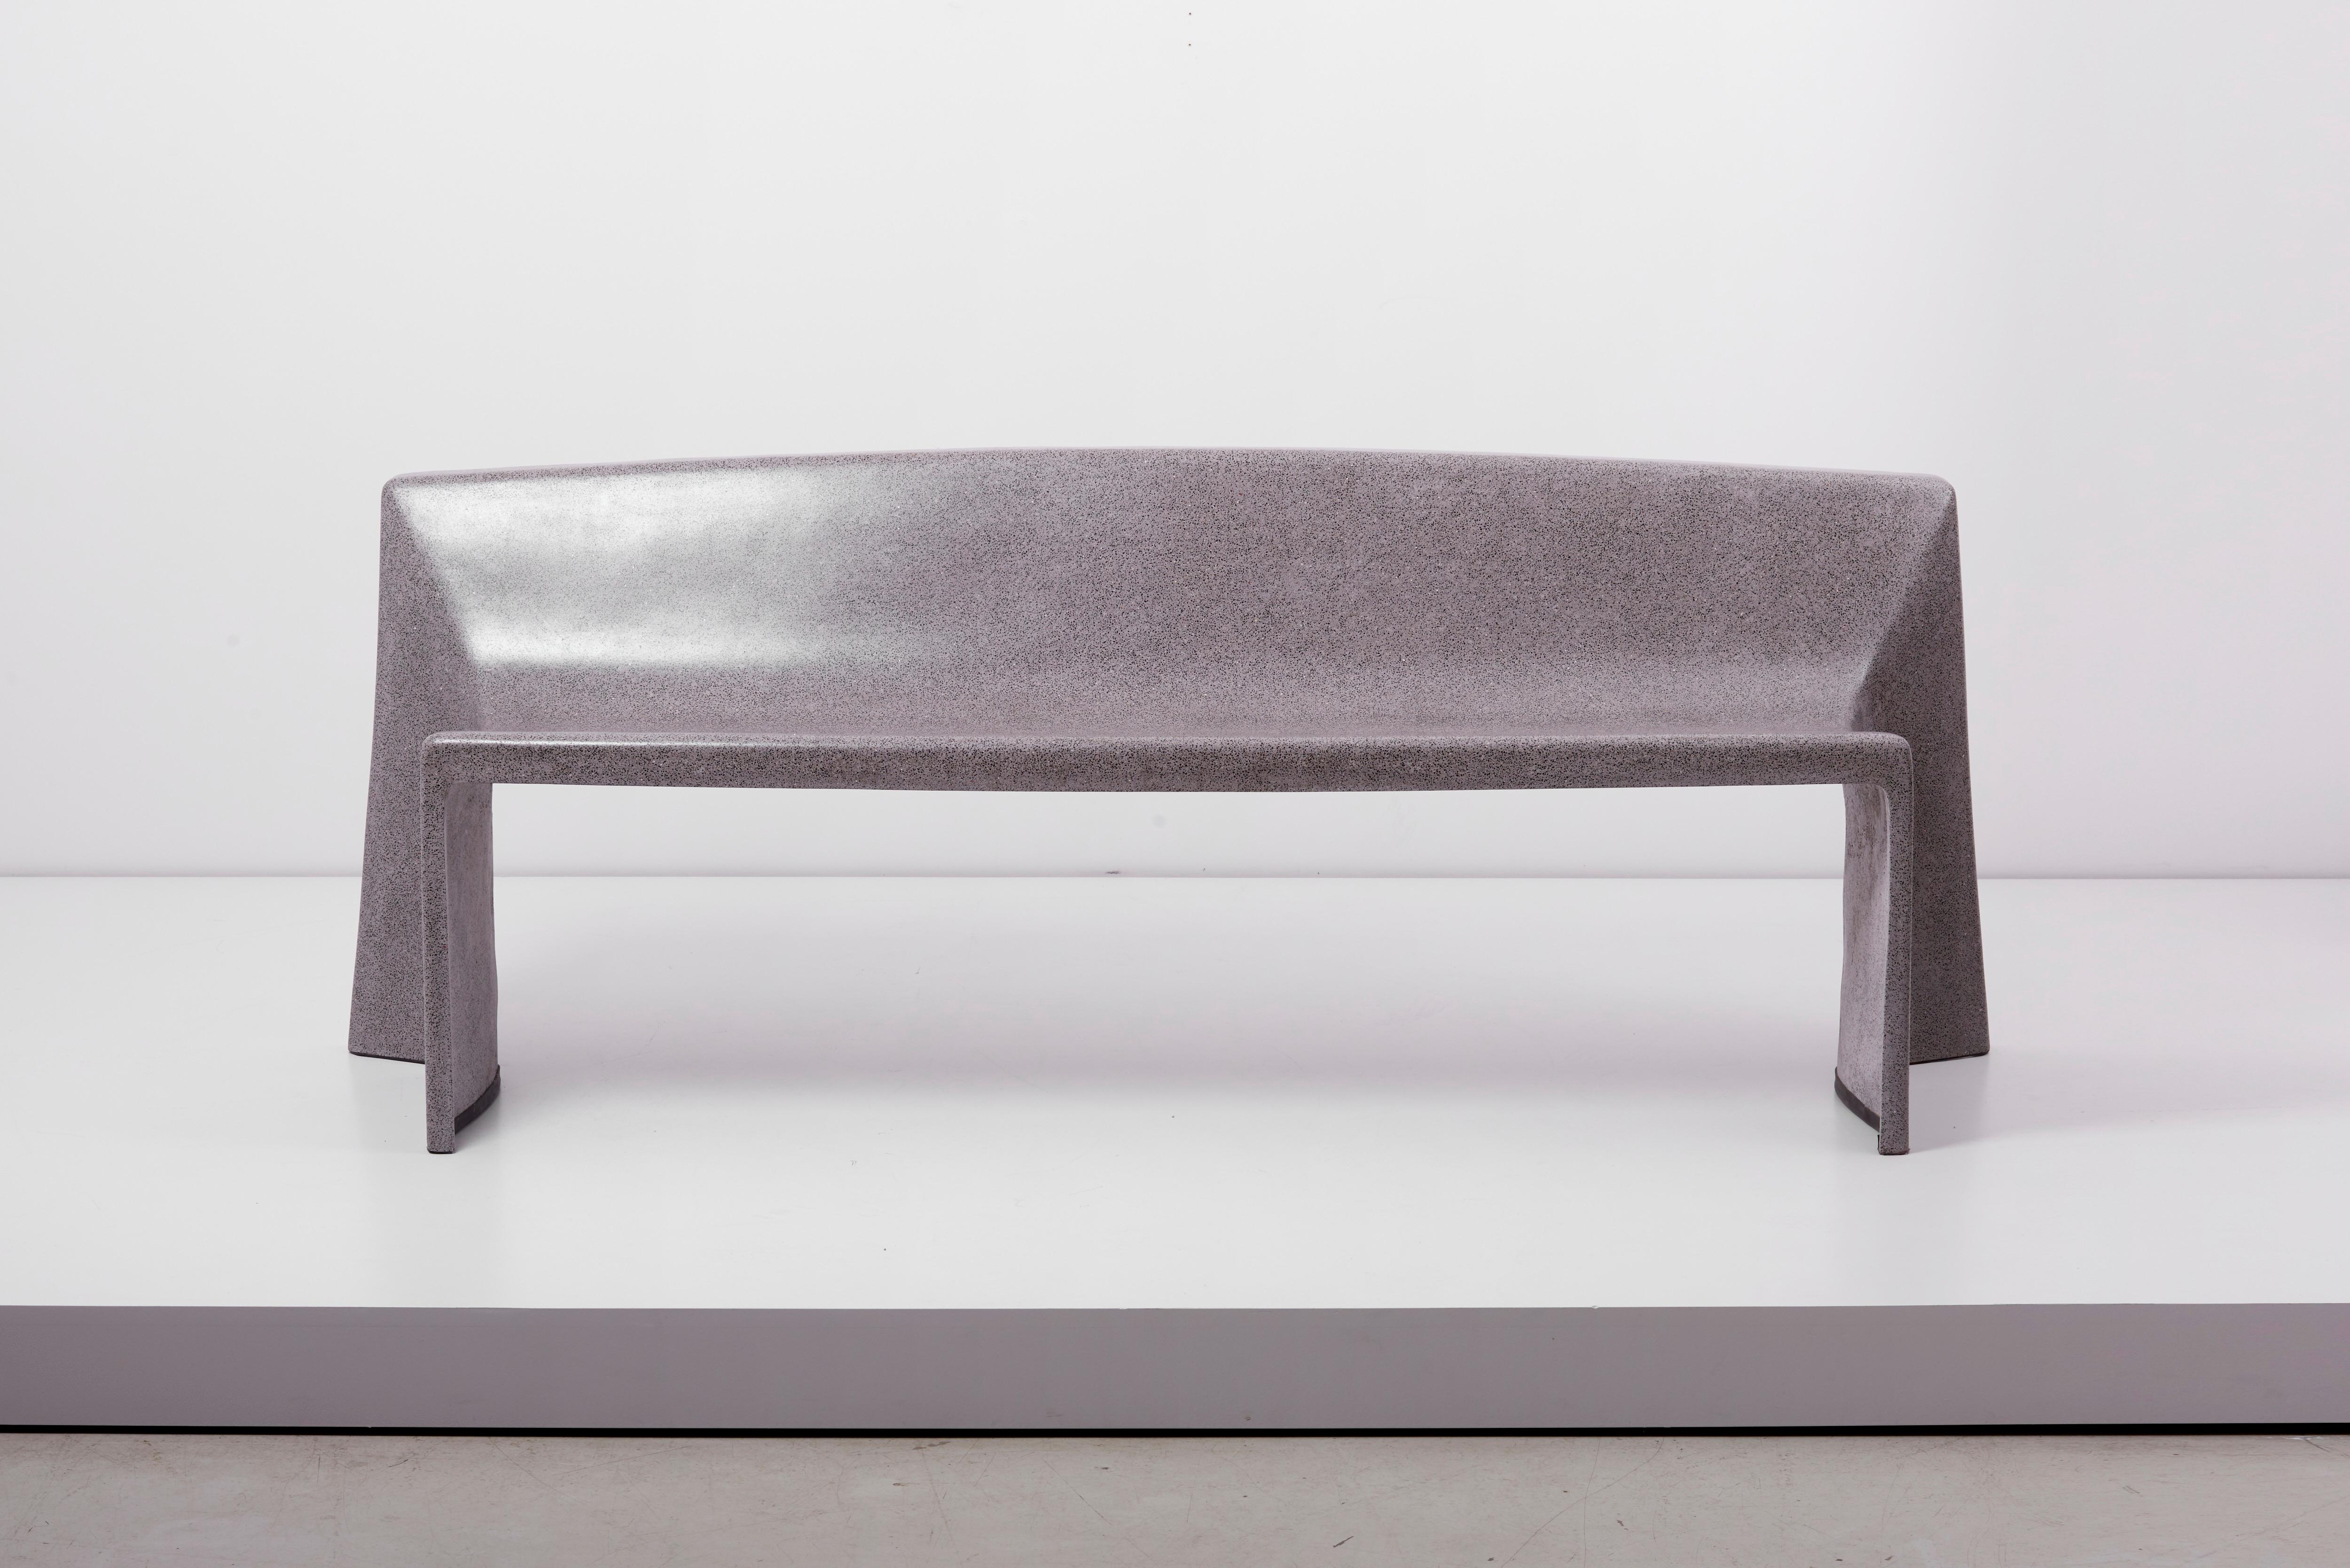 Handmade bench made of concrete by german artist Martin Kleppe.
Martin Kleppe studied at the Art Academy Düsseldorf with Tony Cragg from 1993 to 1999 and graduated as a master student.